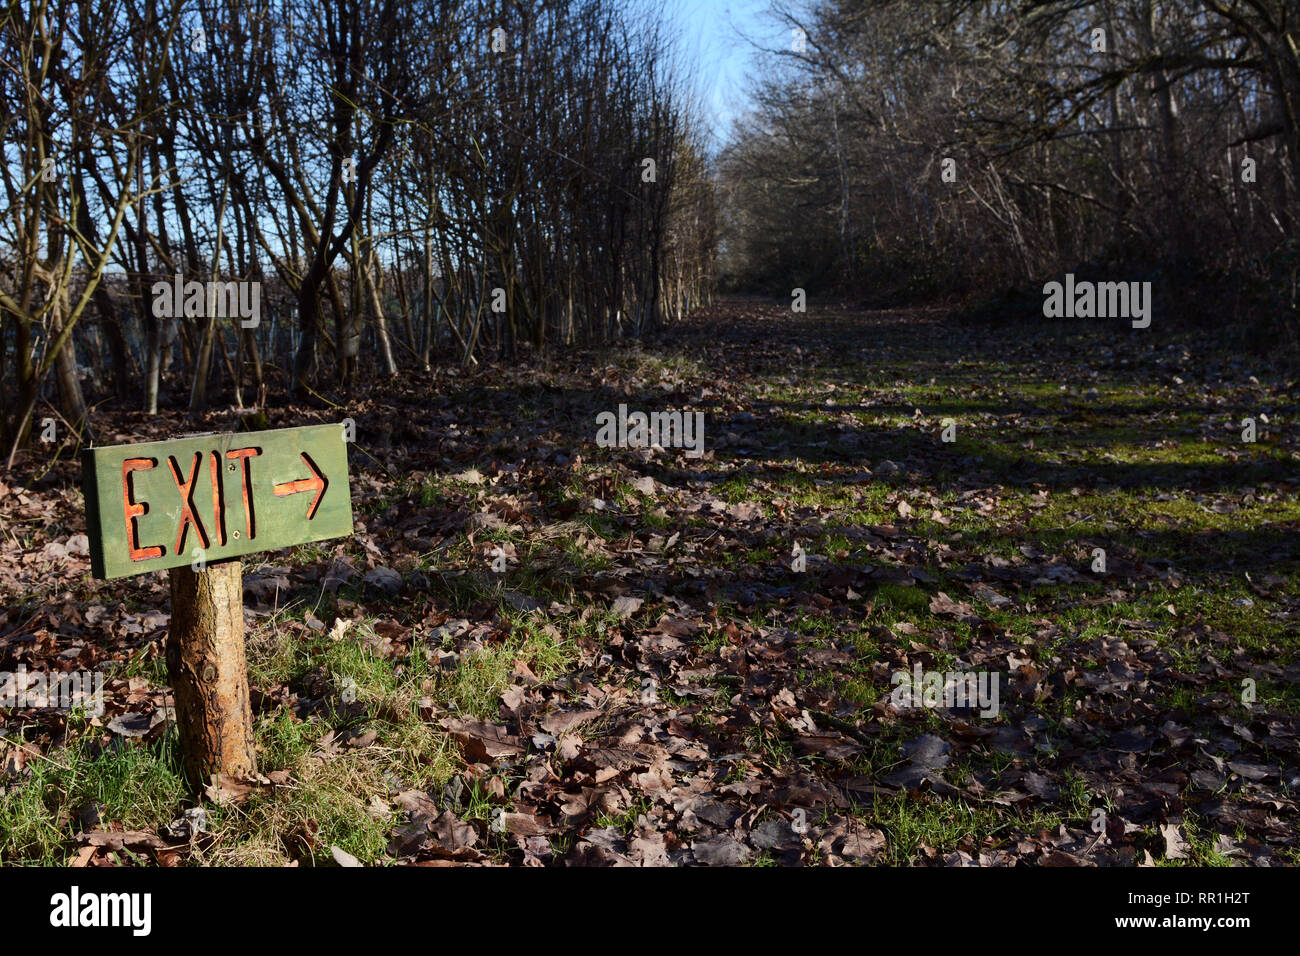 Rustic painted wooden exit sign points down long woodland path between rows of trees Stock Photo